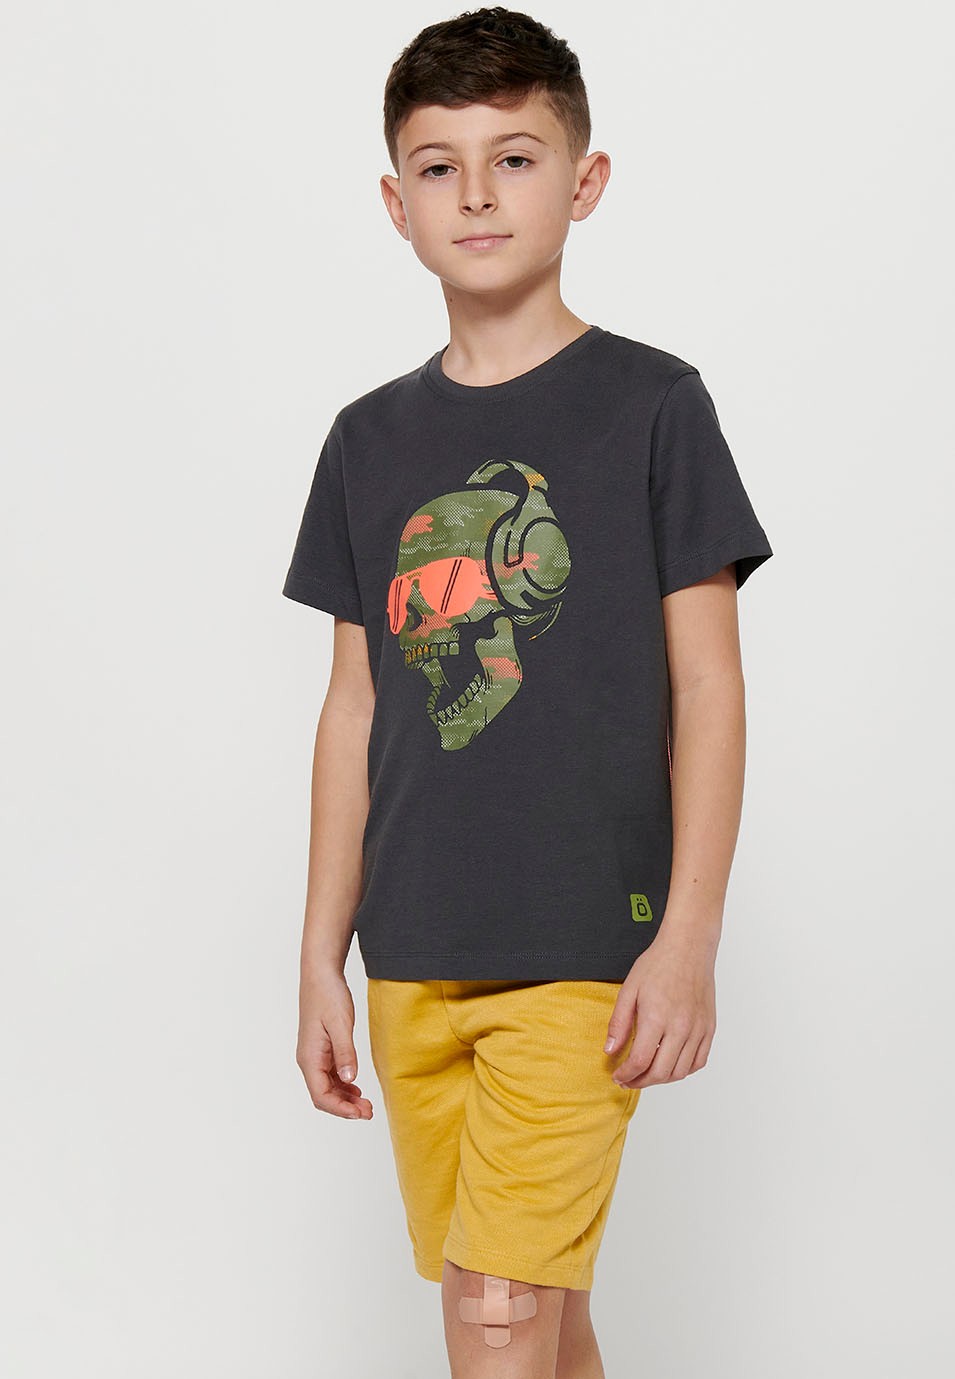 Short-sleeved Cotton Round Neck T-shirt with Dark Gray Front Print for Boys 6